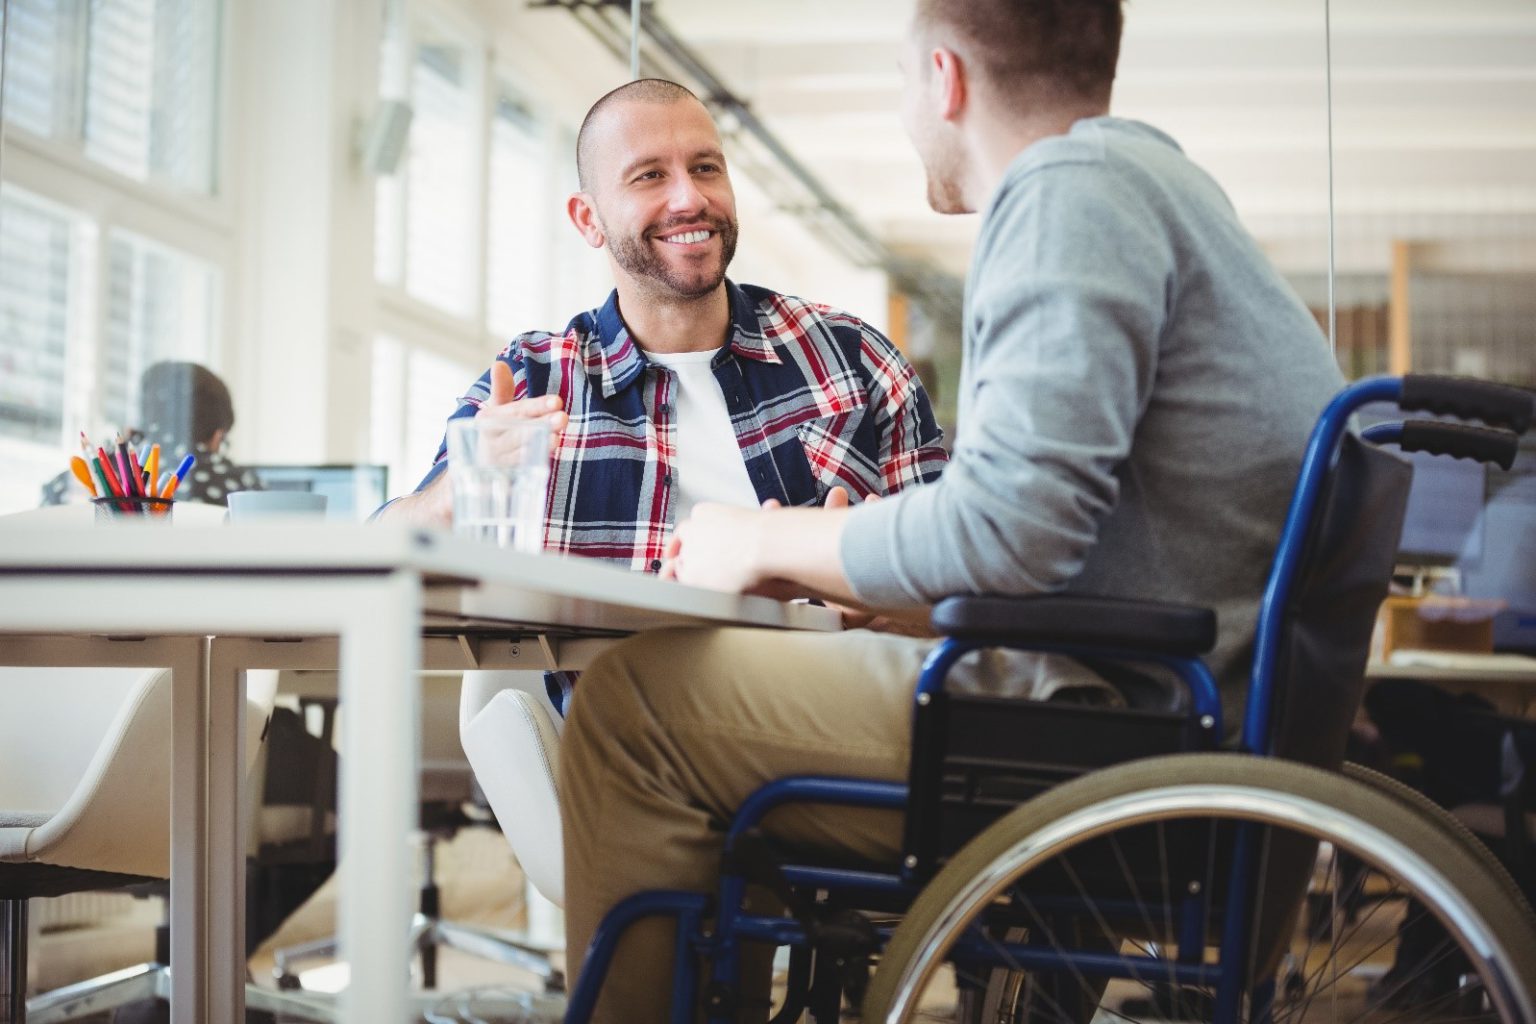 disability services business plan